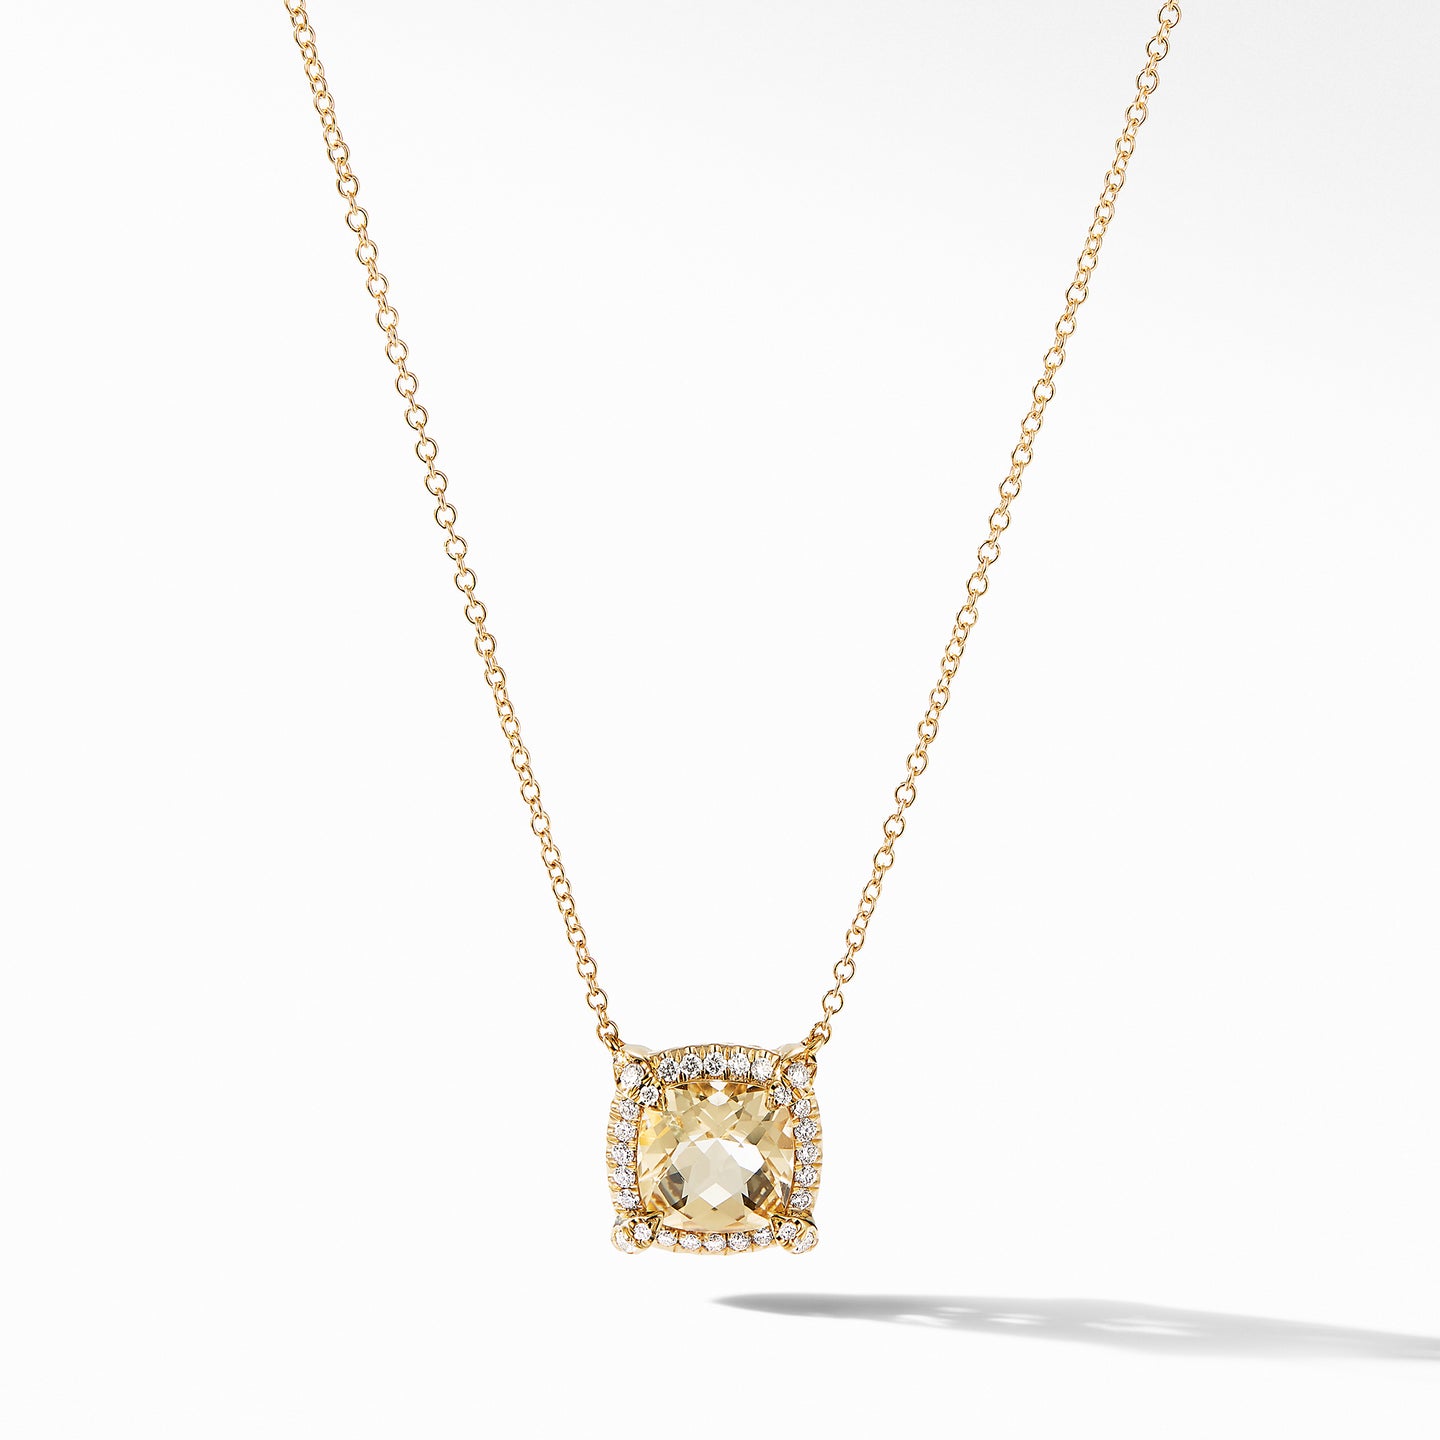 Petite Châtelaine® Pavé Bezel Pendant Necklace in 18K Yellow Gold with Champagne Citrine